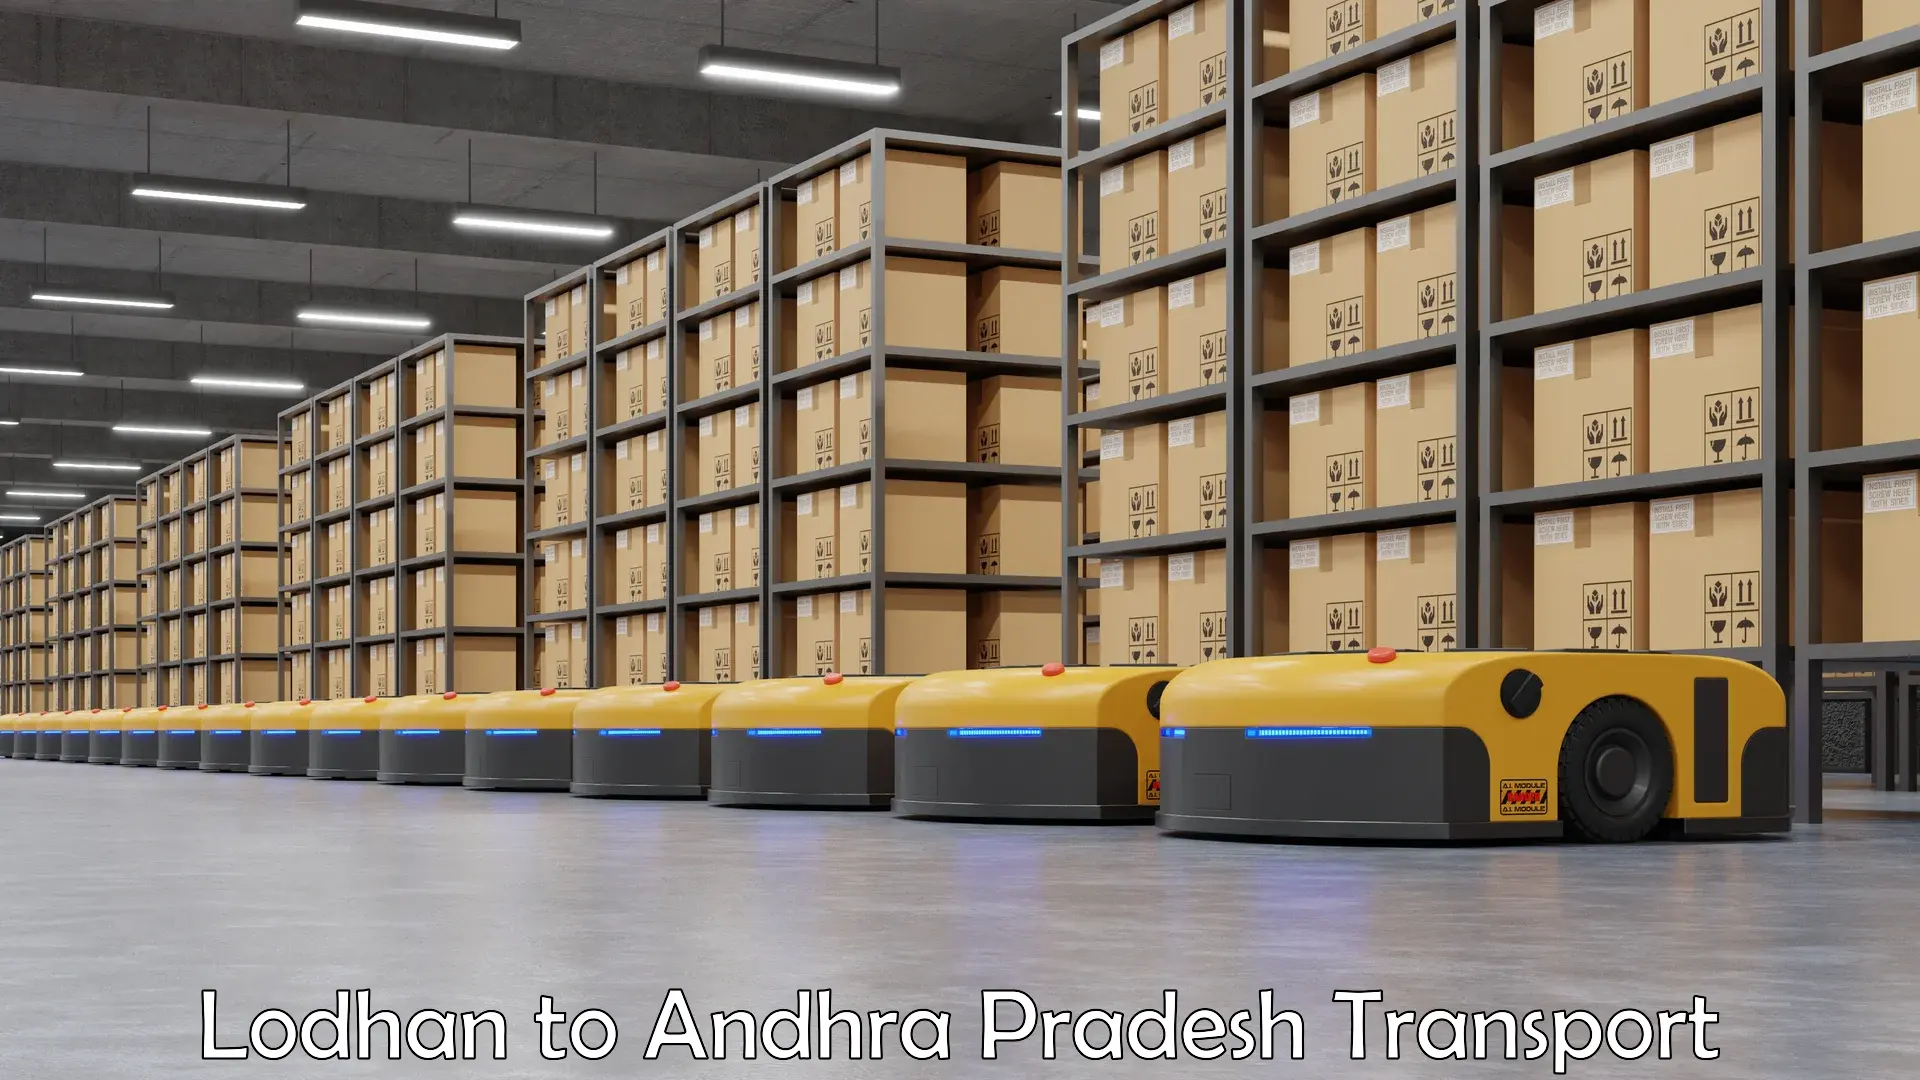 Daily parcel service transport in Lodhan to Machilipatnam